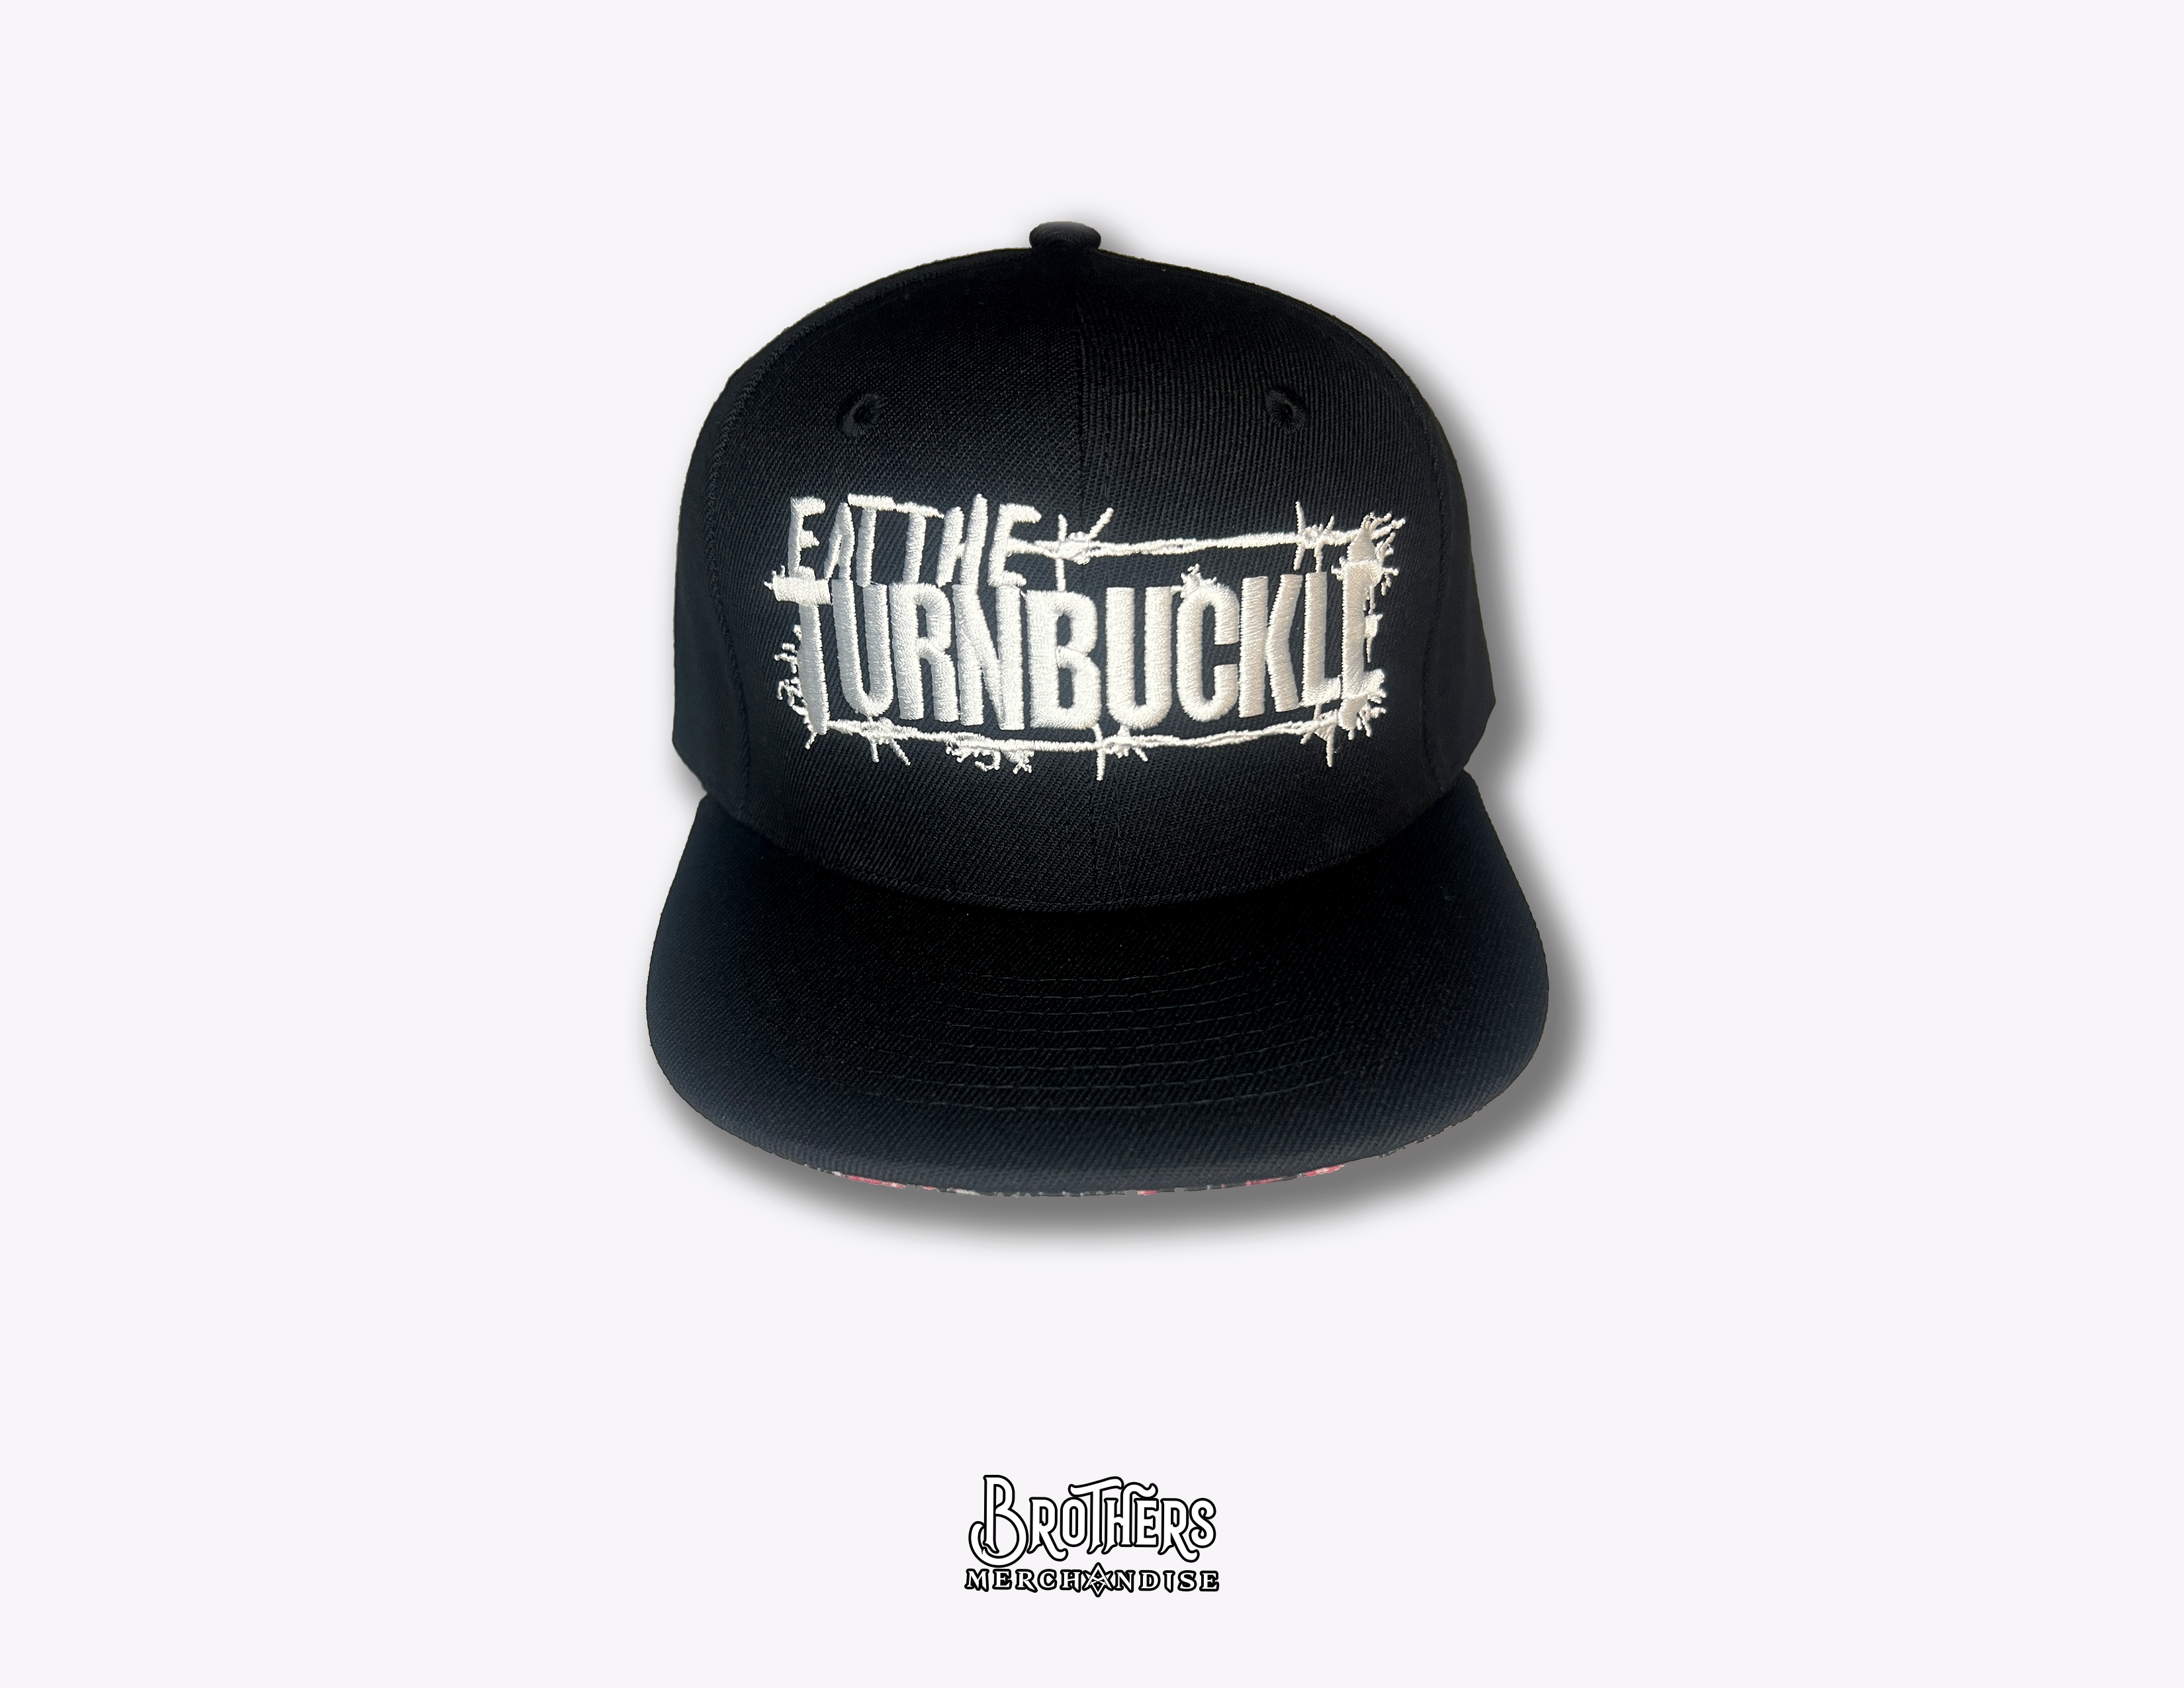 Eat The Turnbuckle Embroidered Logo Snapback